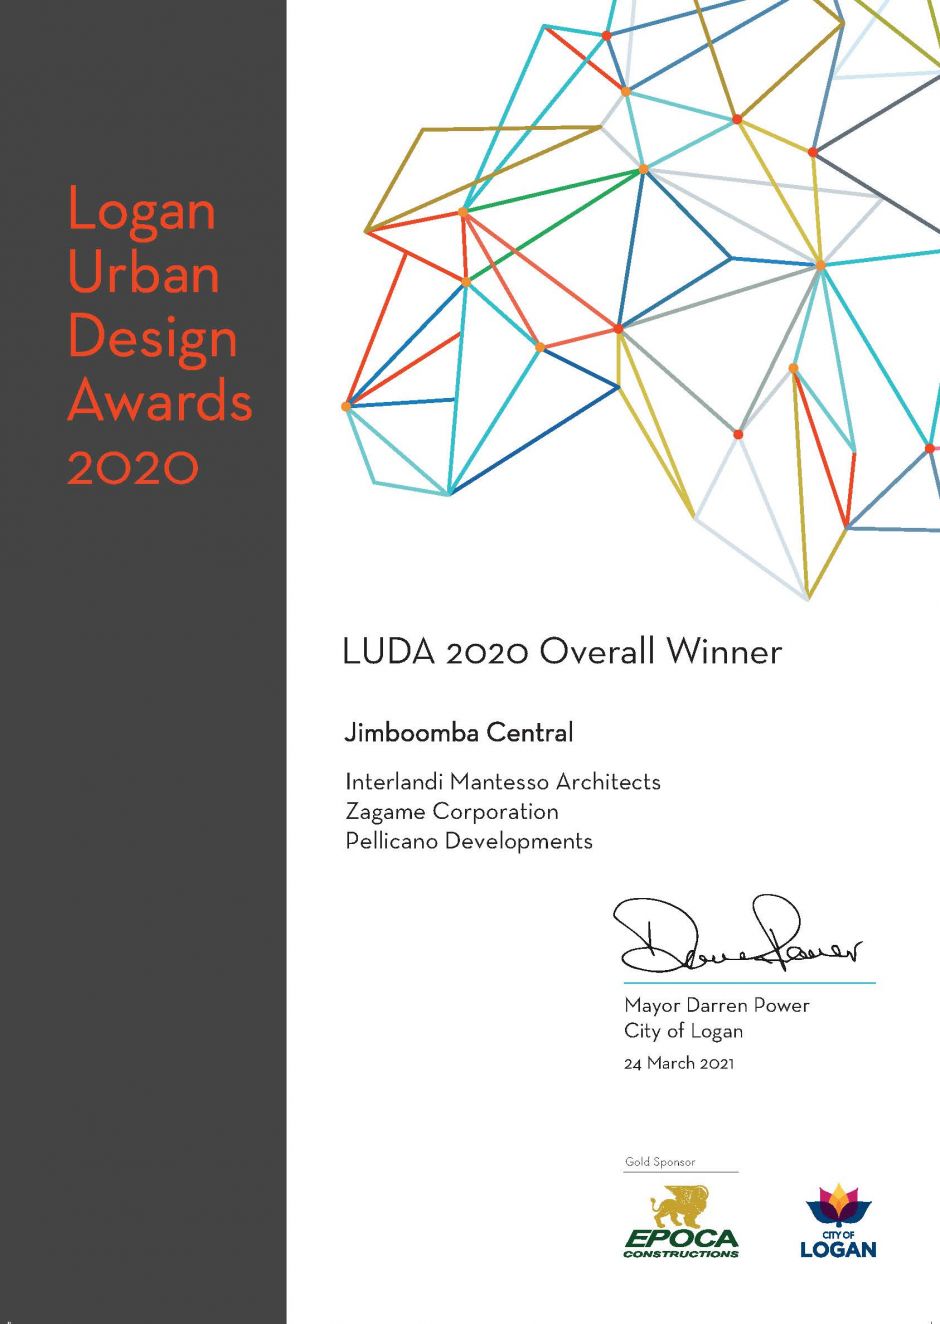 Luda 2020 award certificates - amended - pr - jimboomba central - crop marks - copy page 1